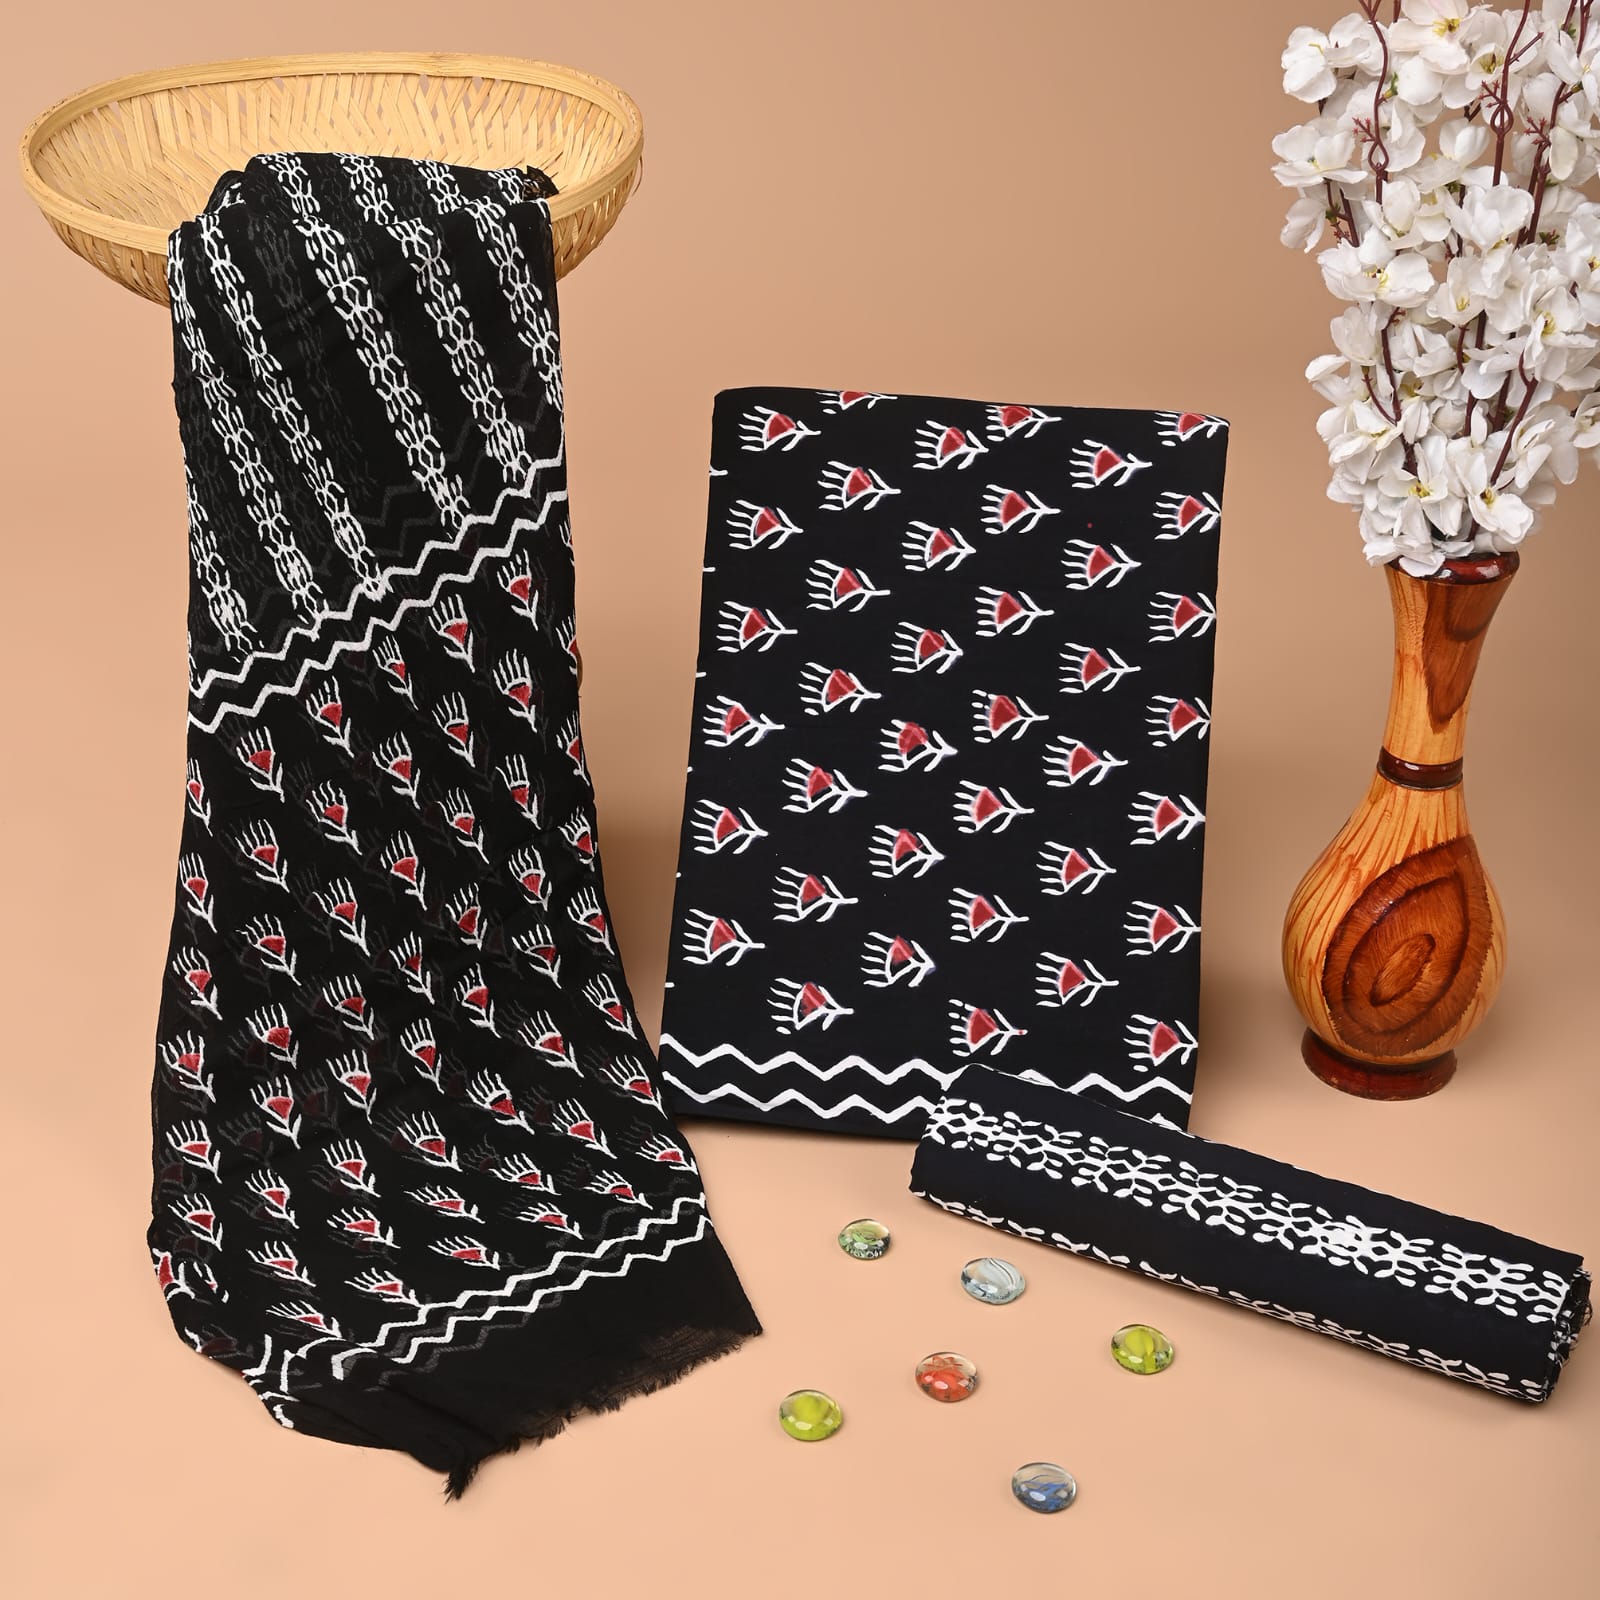 Black and White Geometric Cotton Salwar Suit - Refined Office Attire